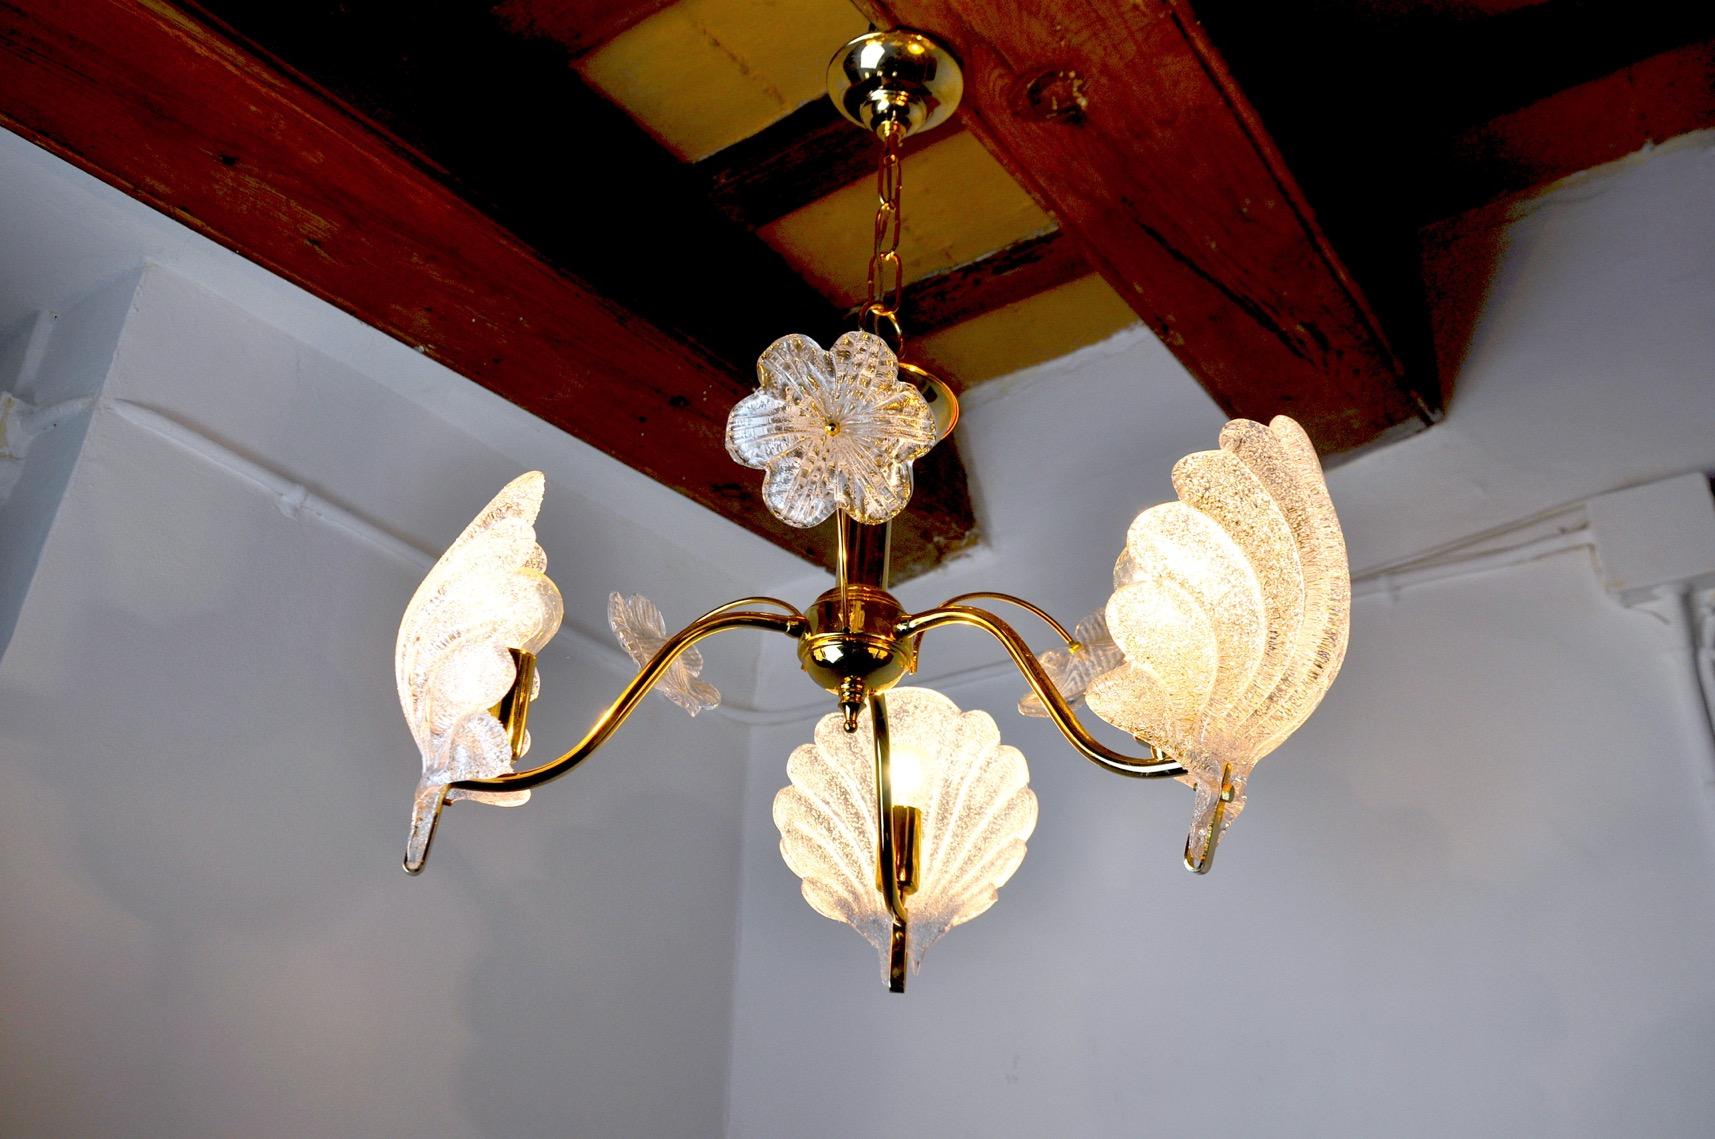 Very beautiful 3-arm chandelier by Carl Fagerlund for Lyfa from the 70s. This chandelier is made of leaf-shaped frosted Murano glass. The diffused light is soft and harmonious, perfect for illuminating your interior. Repair not visible on one of the